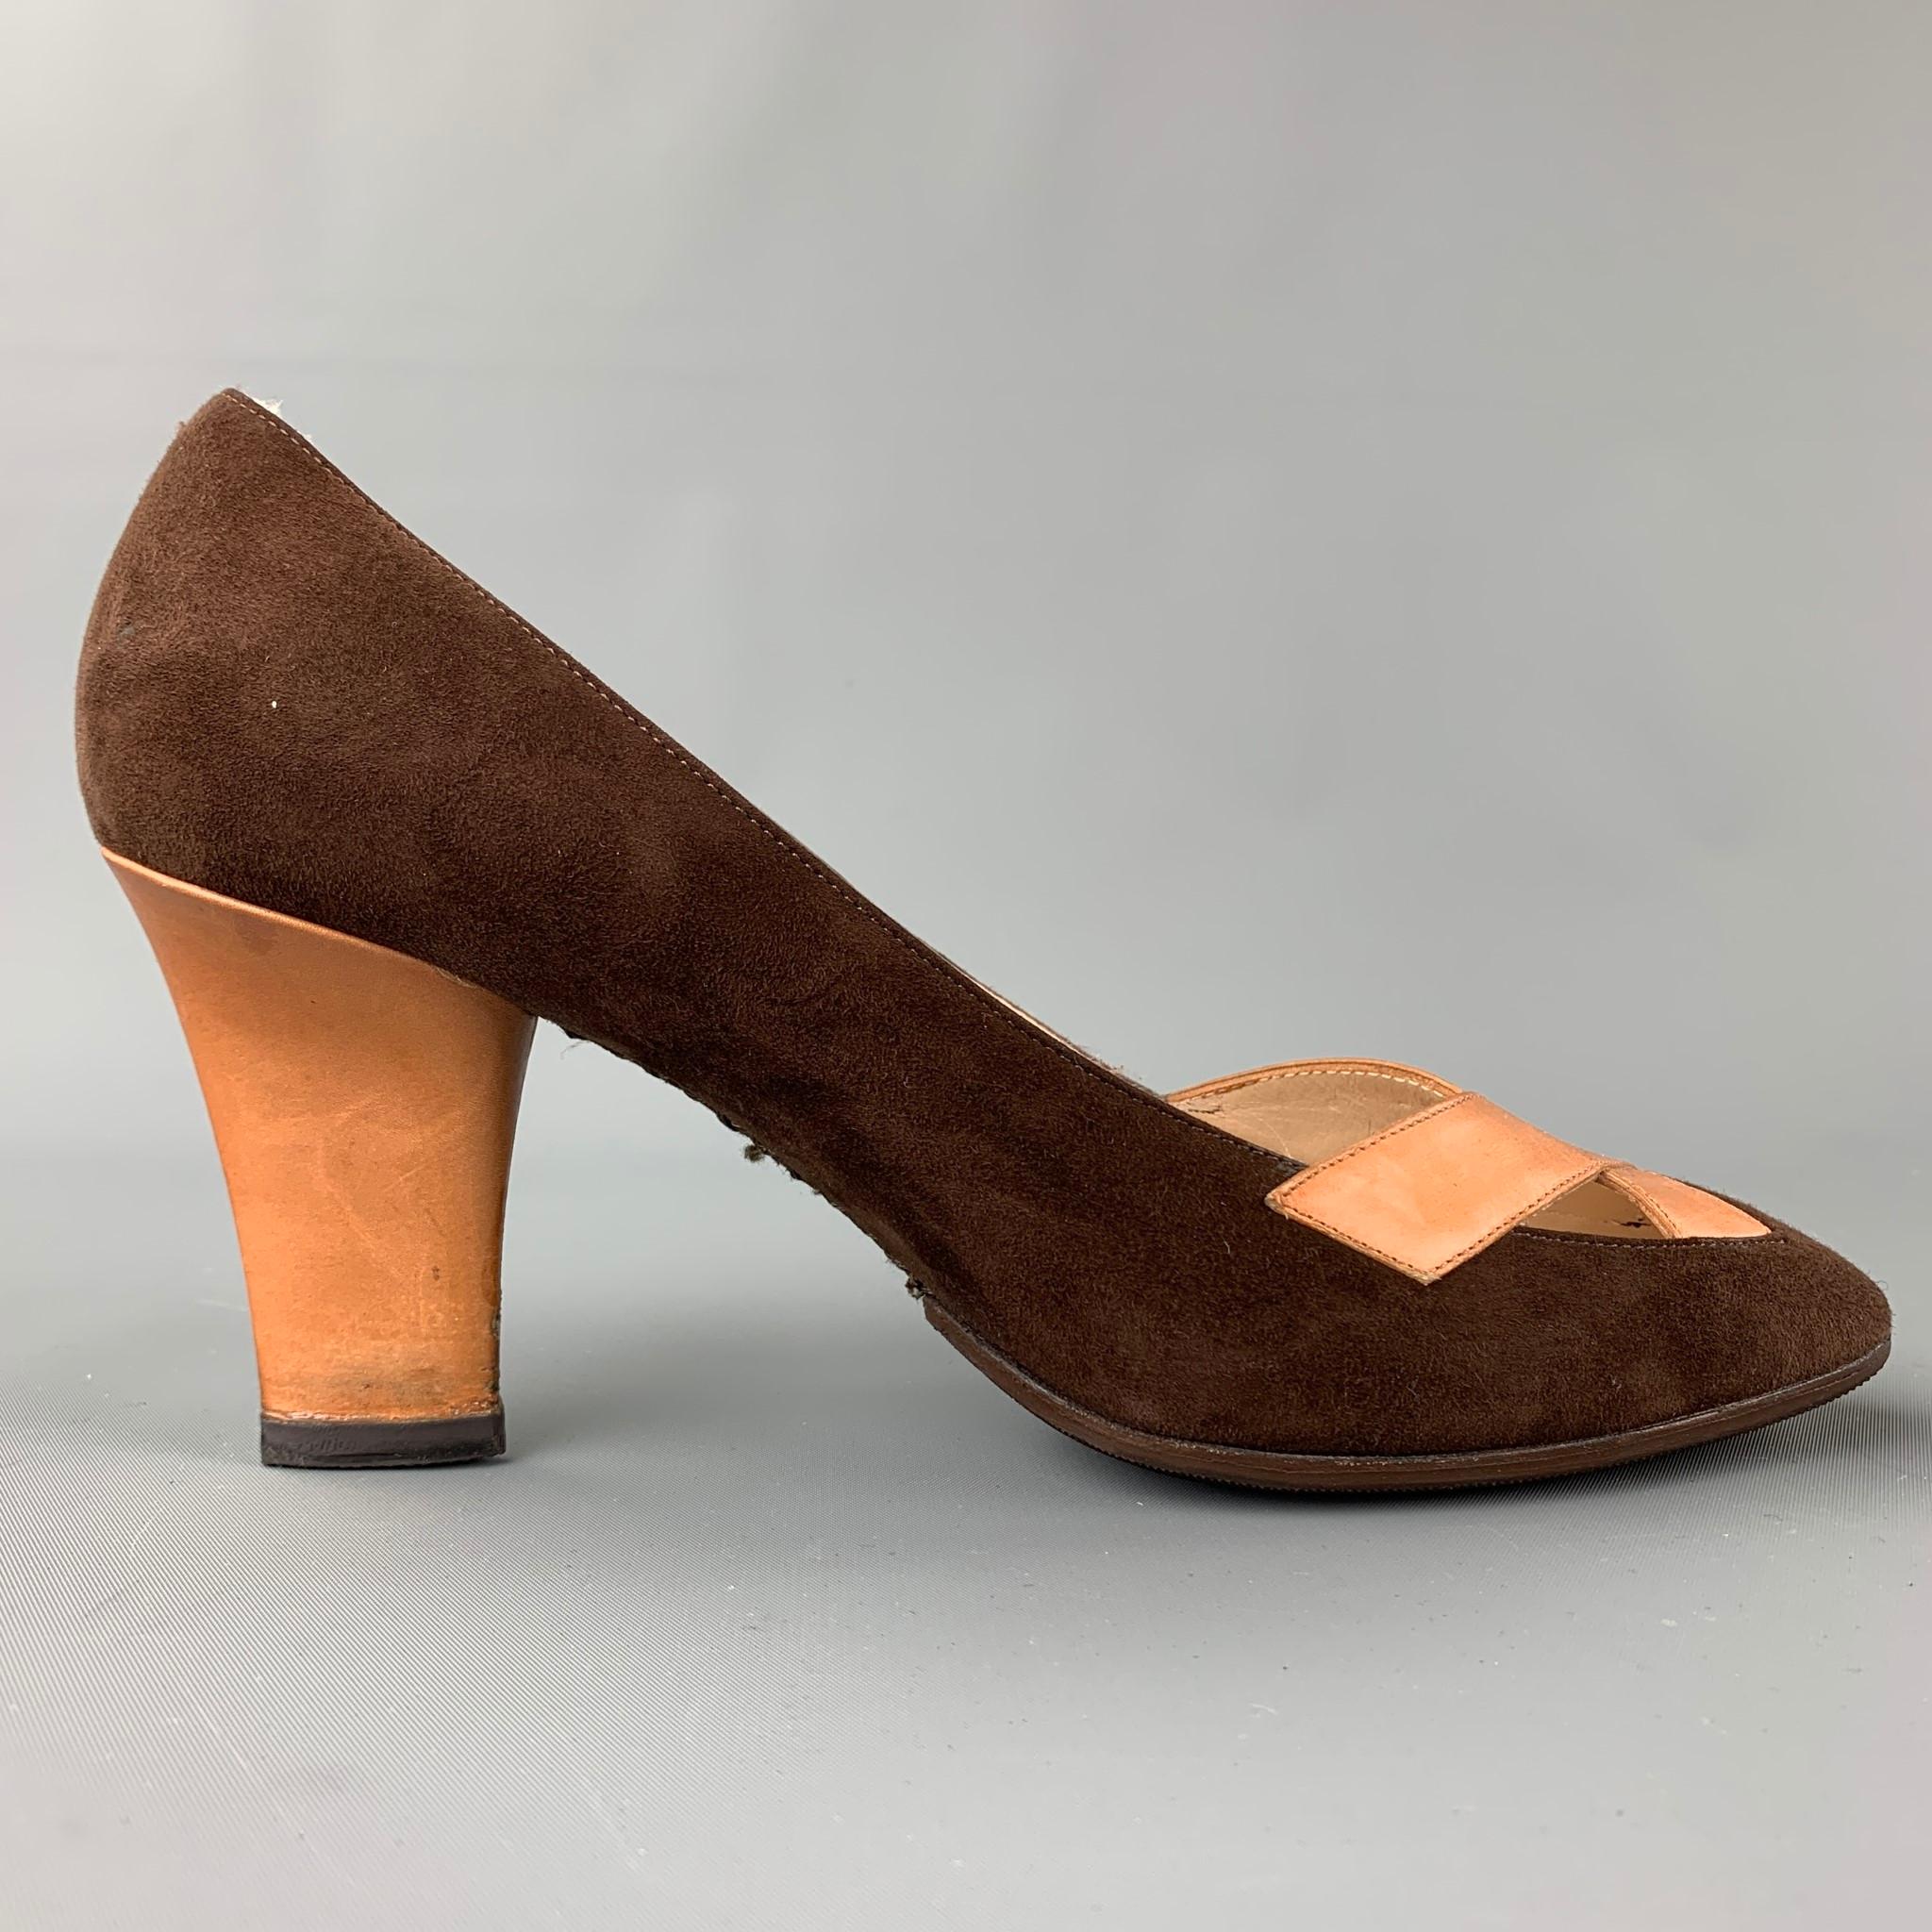 GIVENCHY pumps comes in a brown suede with a cognac criss-cross design and a cuban heel. 

Very Good Pre-Owned Condition.
Marked: No size marked

Measurements:

Heel: 3.5 in.